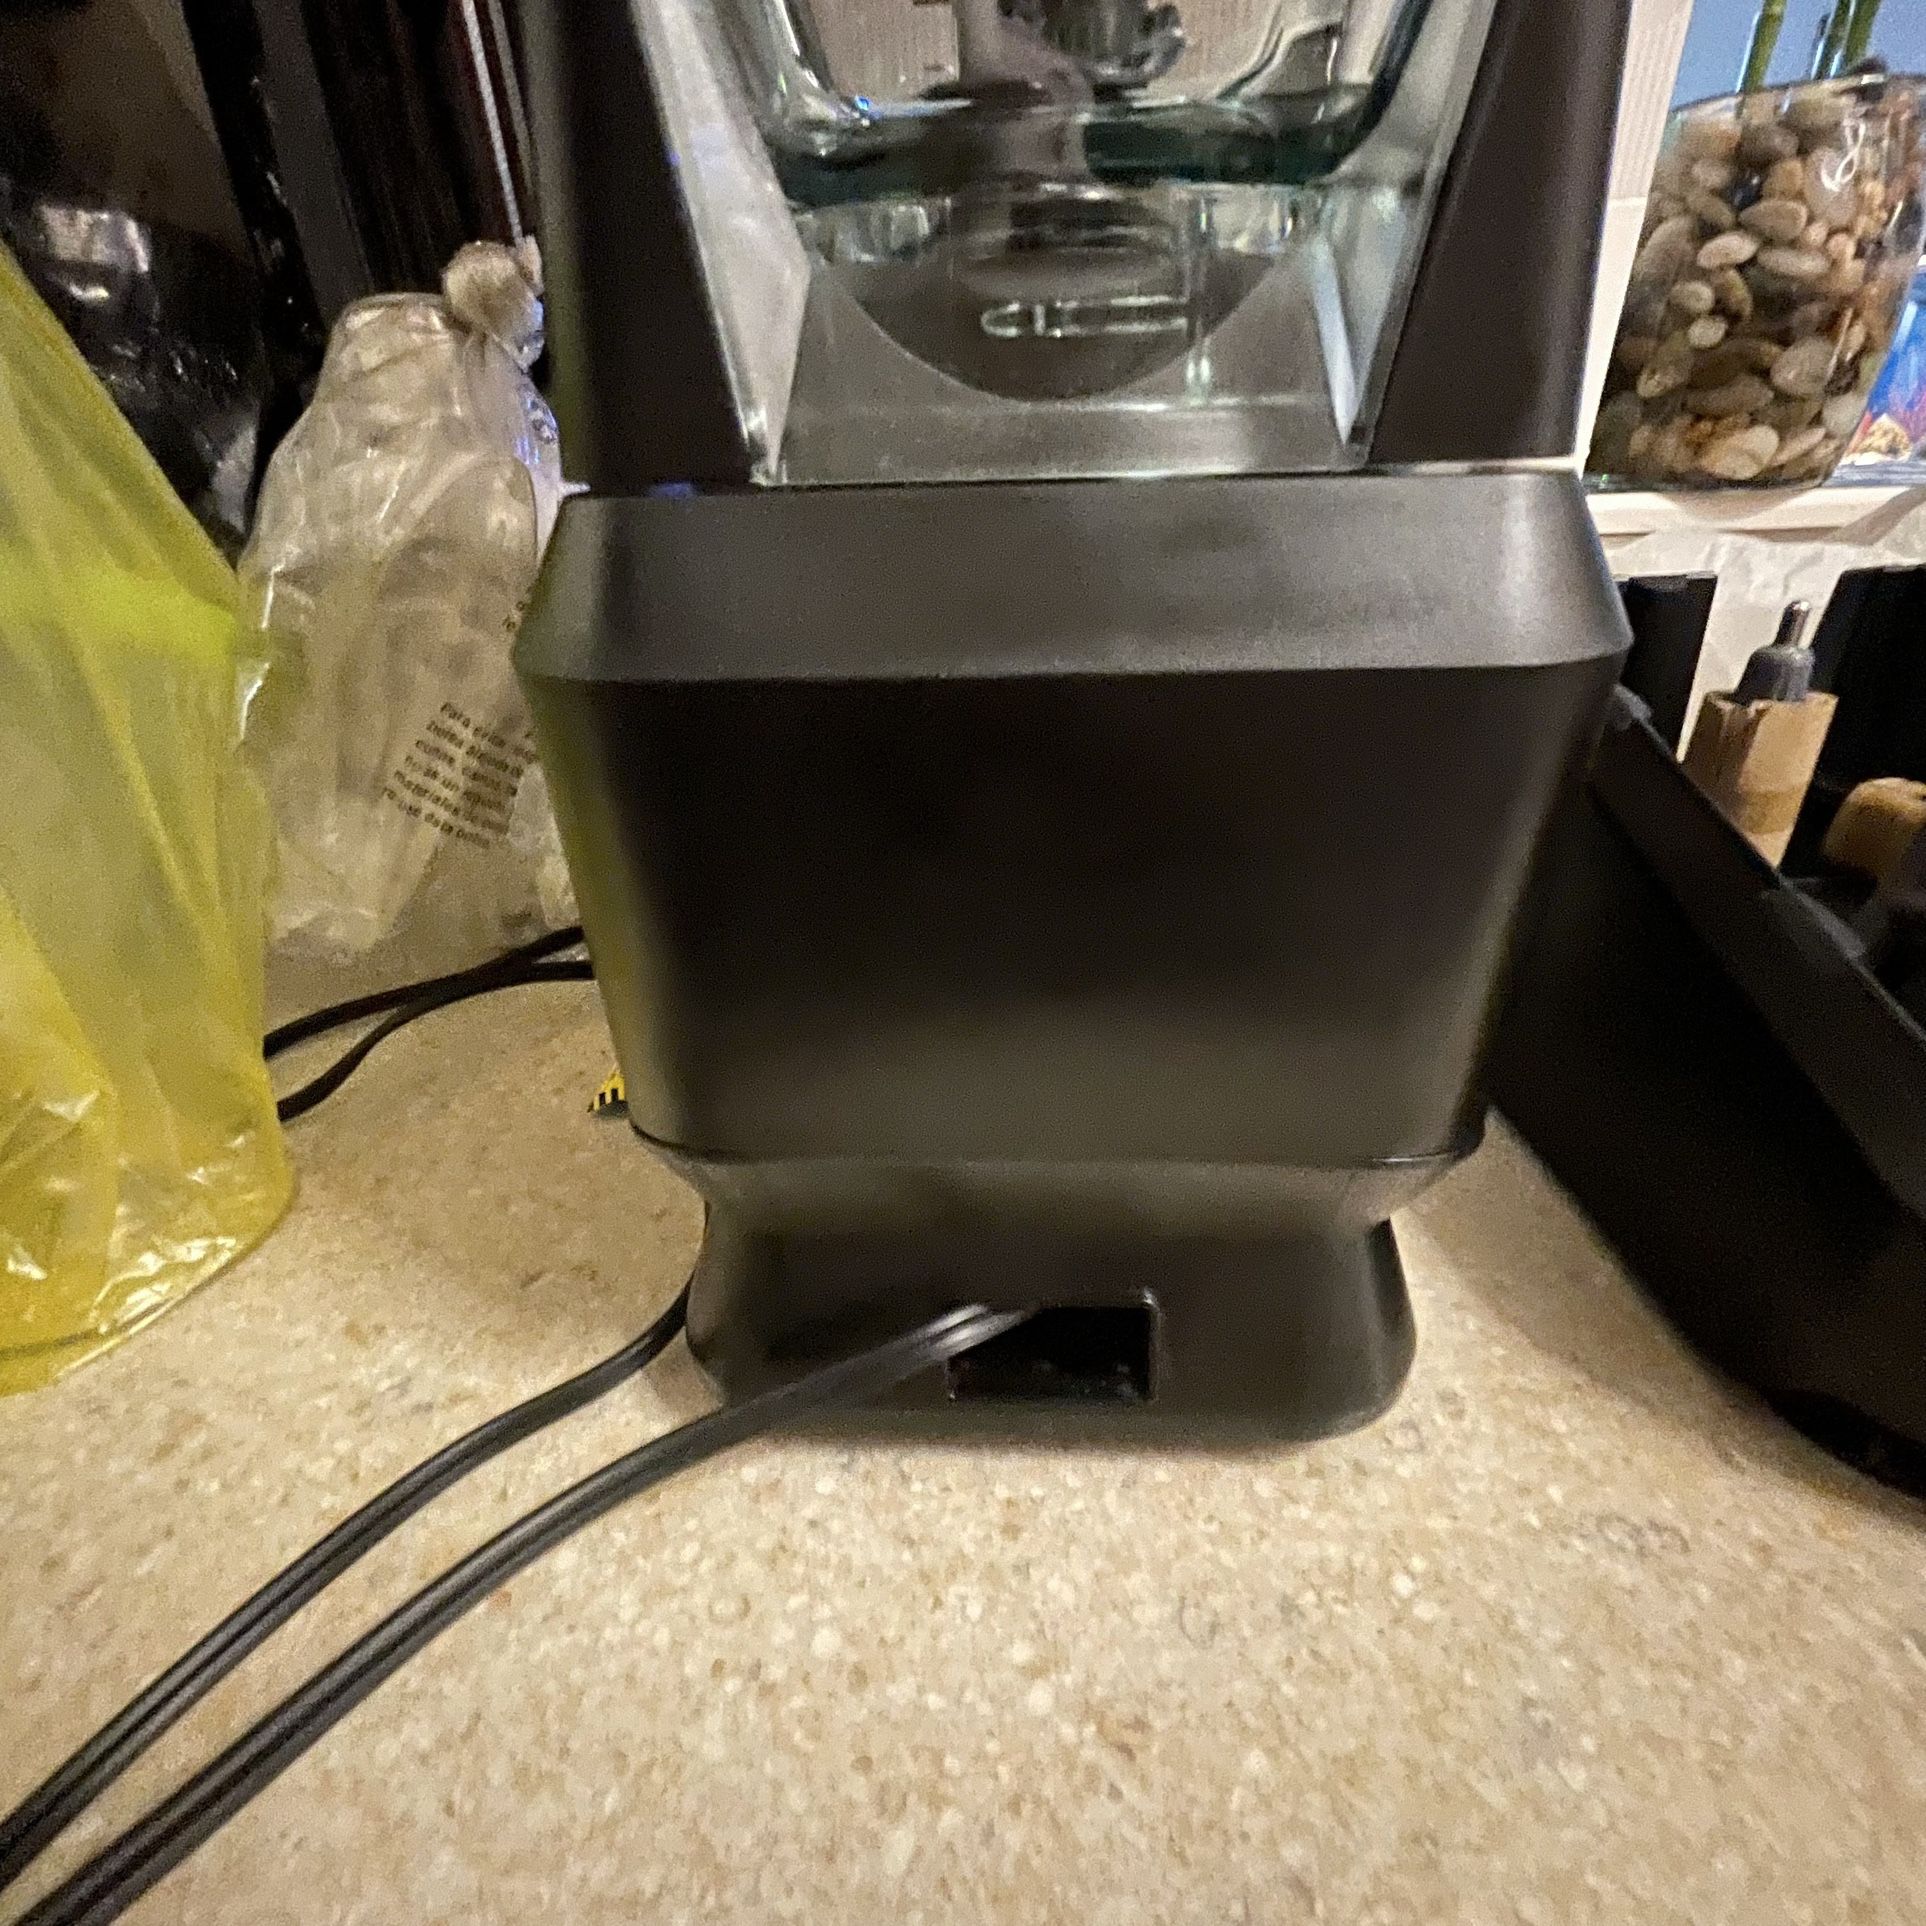 Ninja BL660 Professional Compact Smoothie & Food Processing Blender  1100-Watts for Sale in Allentown, PA - OfferUp